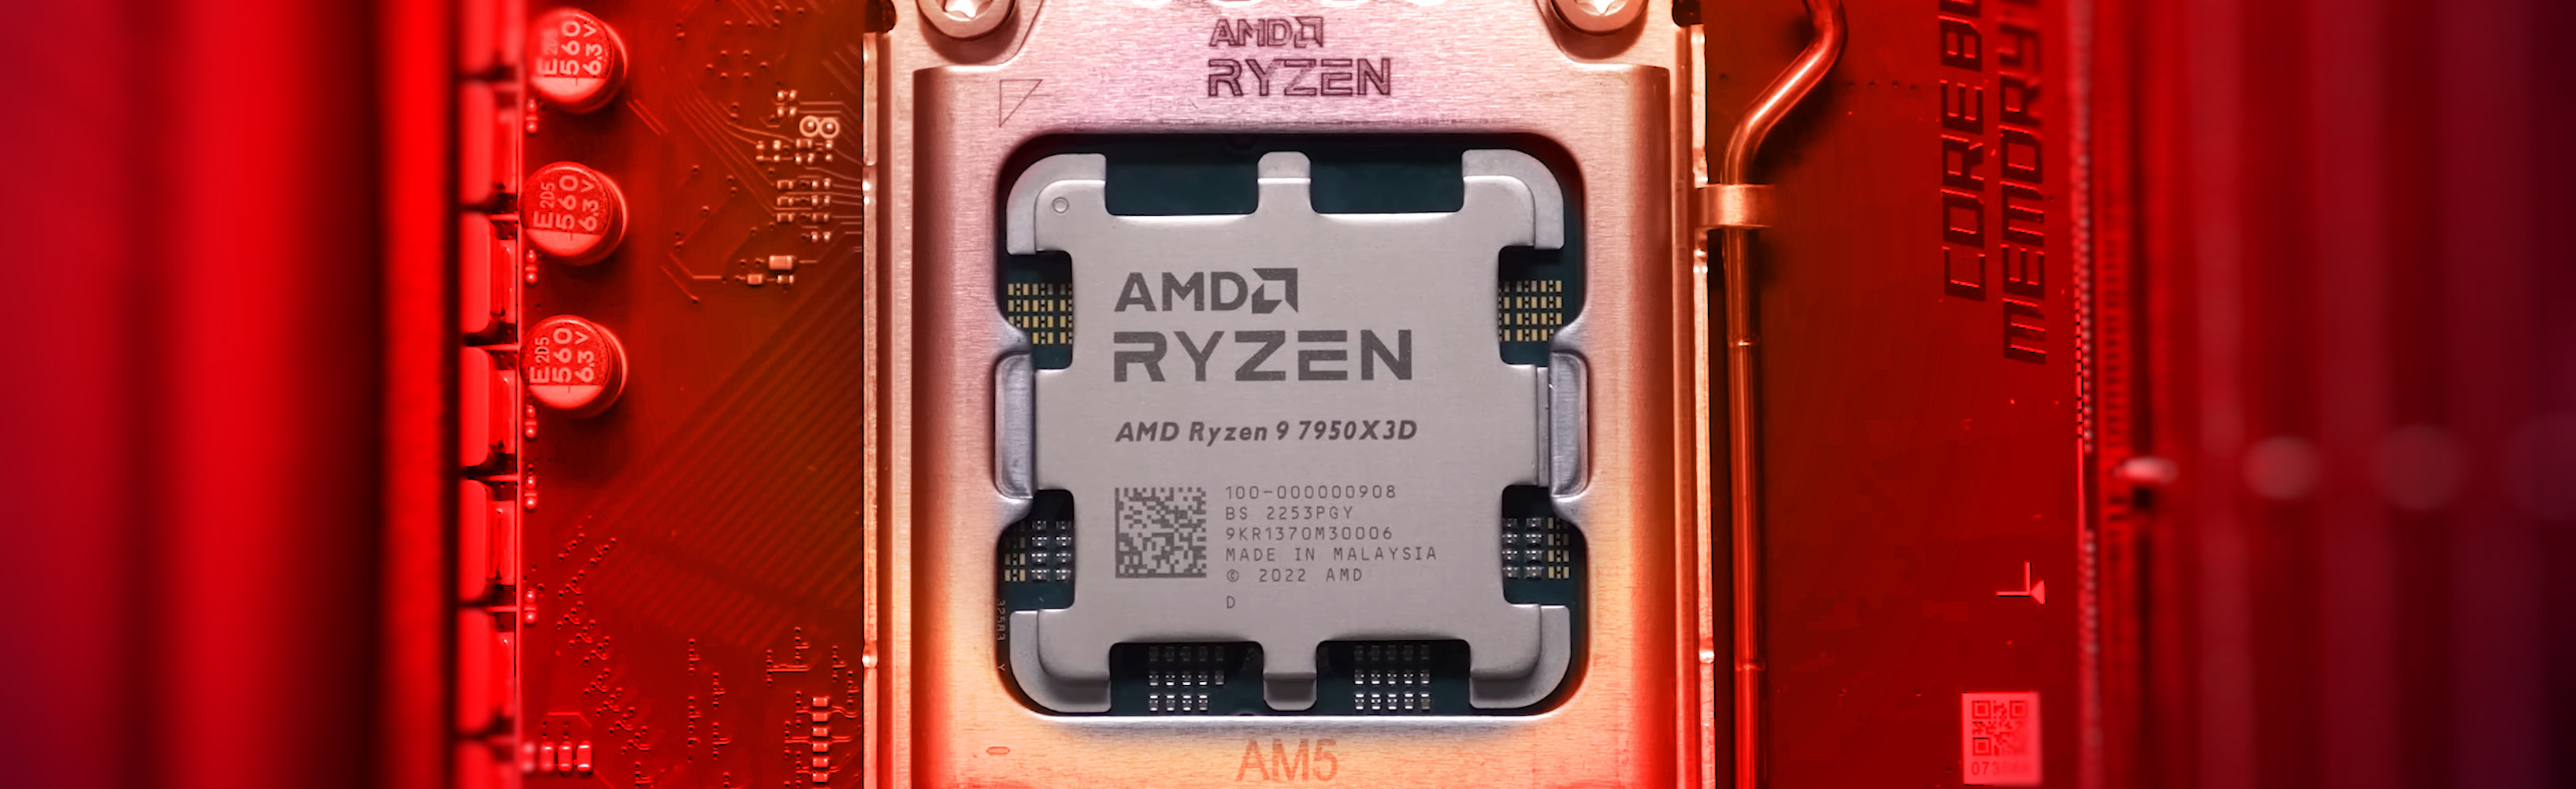 AMD Ryzen 9 7950X3D review: the new fastest gaming CPU